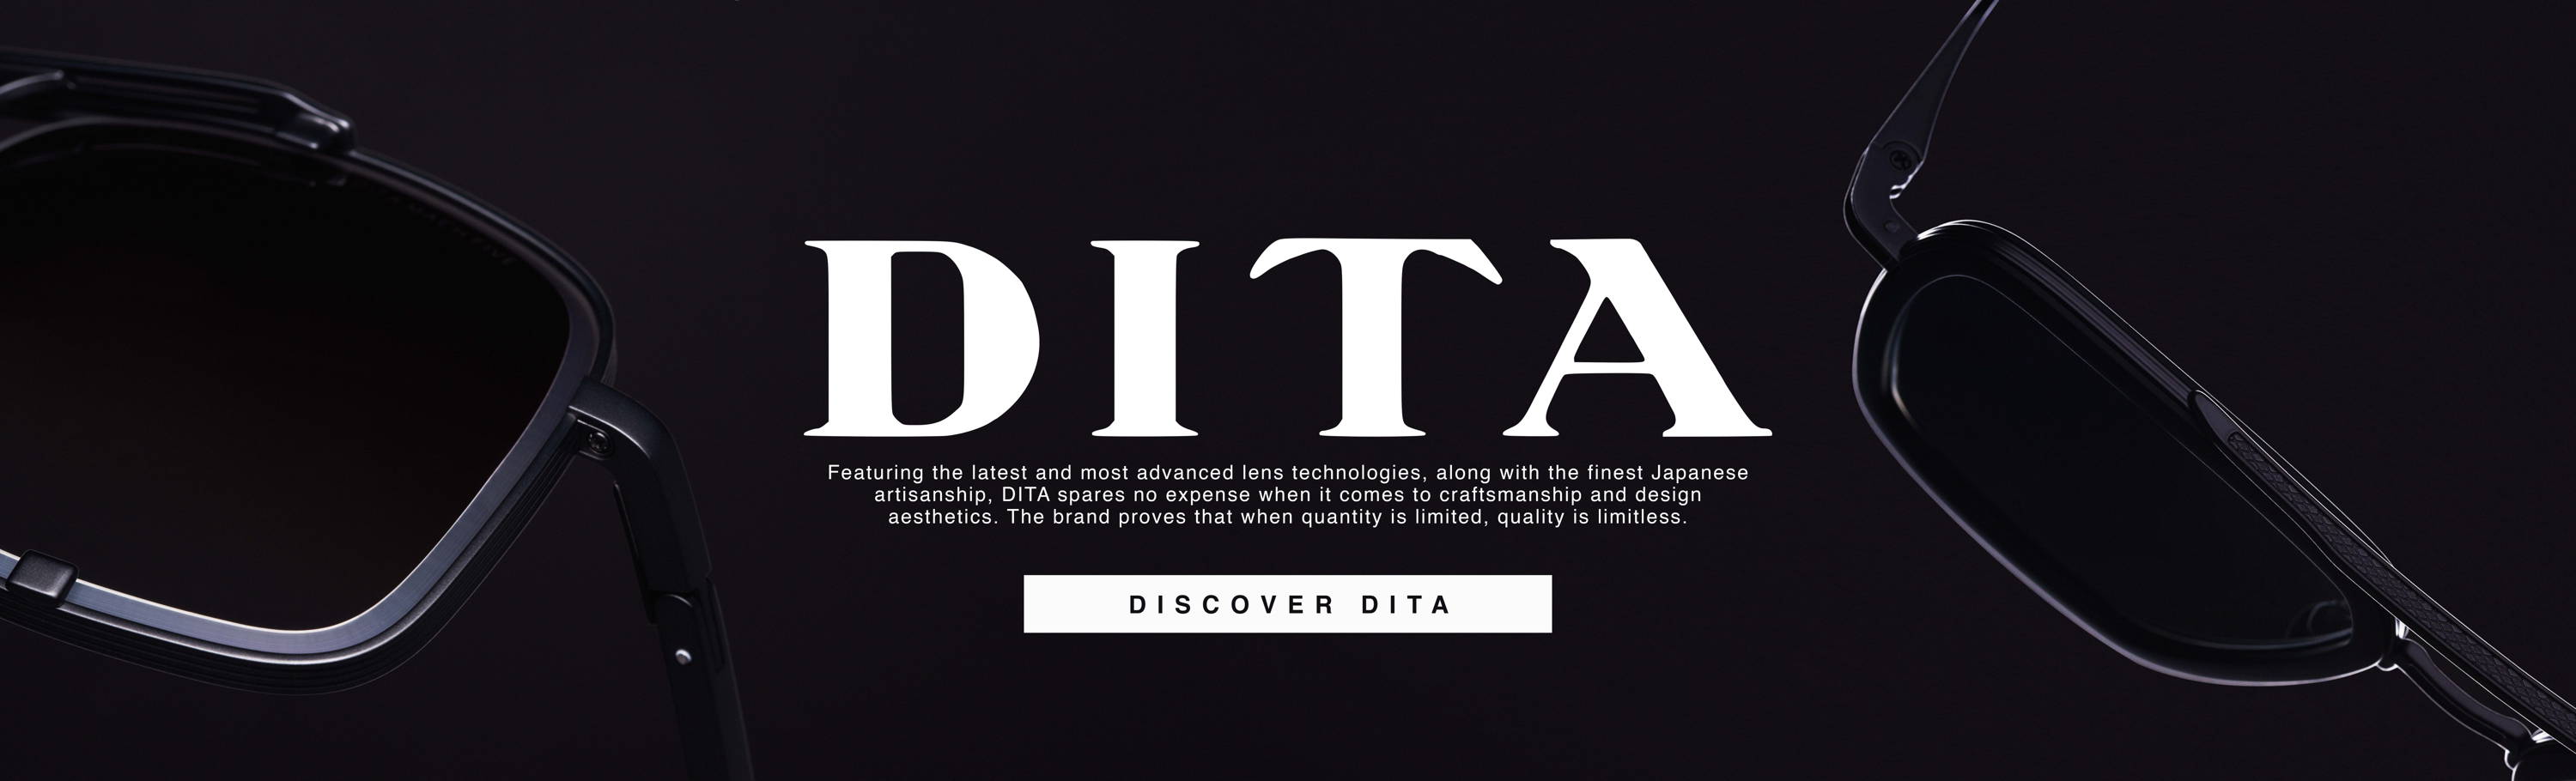 Featuring the latest and most advanced lens technologies, along with the finest Japanese artisanship, DITA spares no expense when it comes to craftsmanship and design aesthetics. The brand proves that when quantity is limited, quality is limitless.